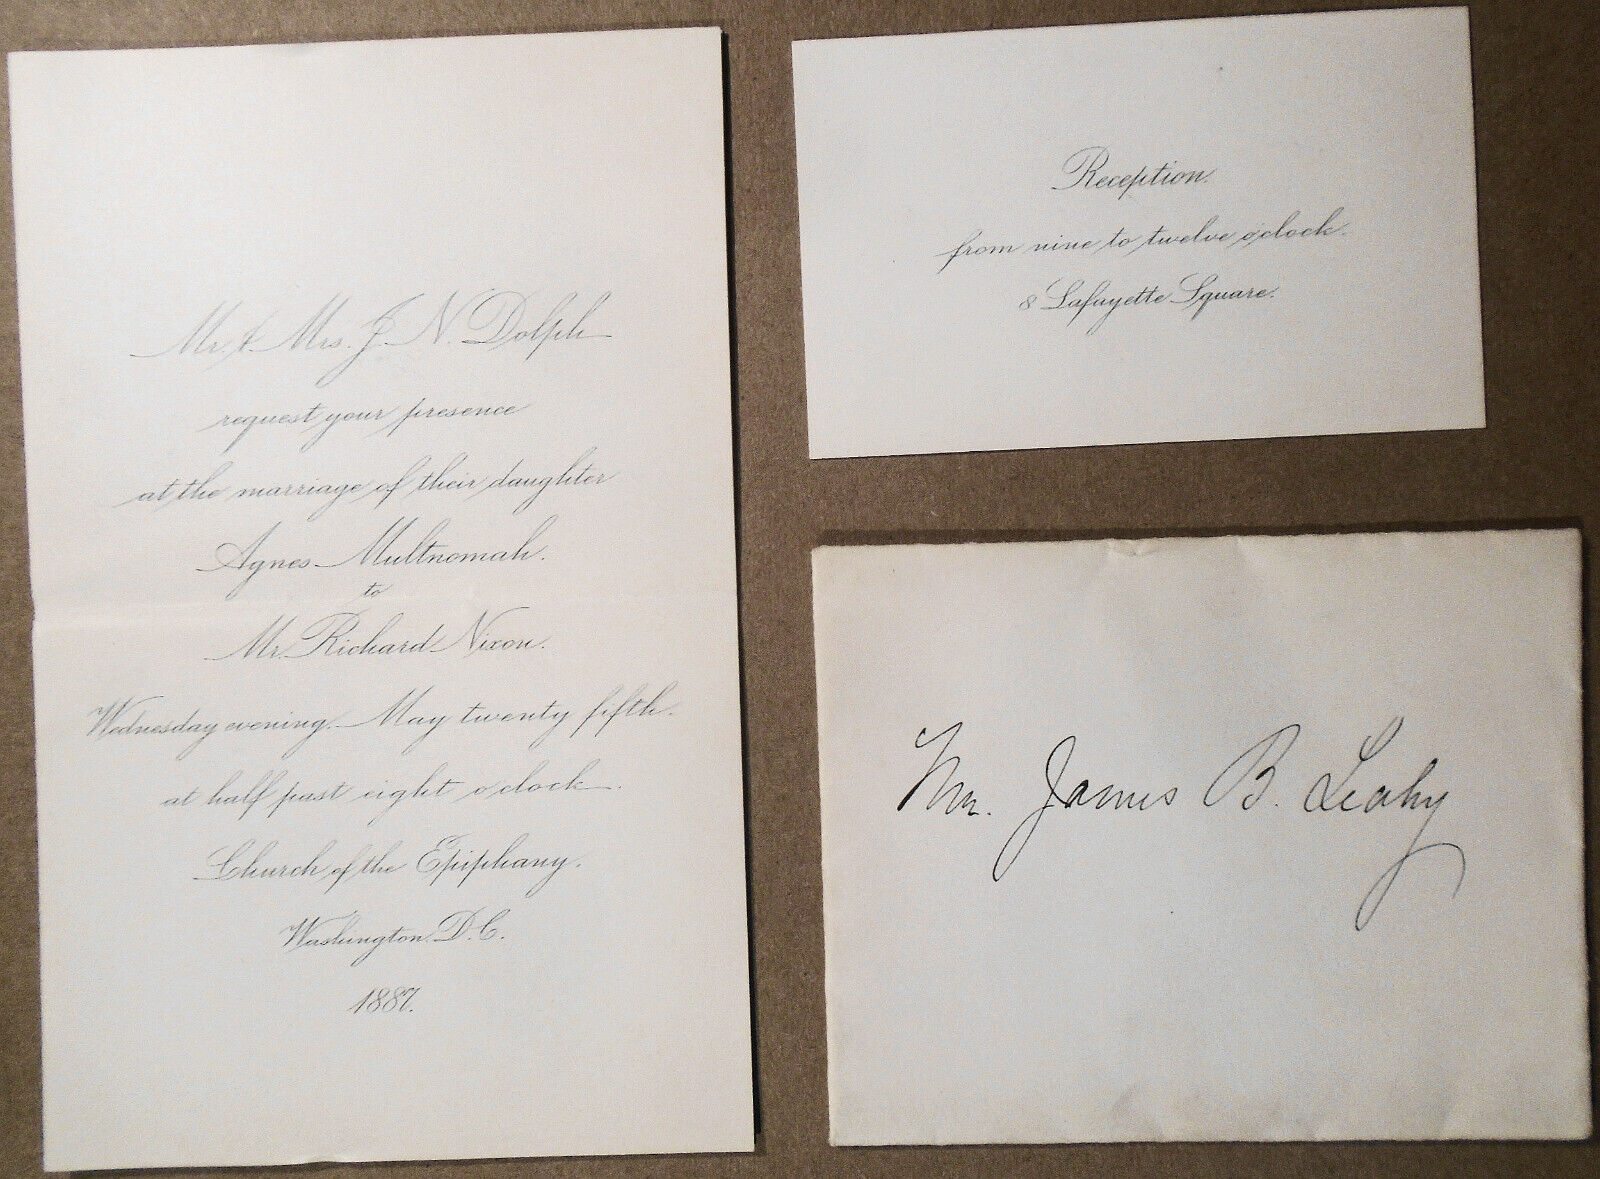 1887 Marriage: wedding and reception invitations: Richard Nixon and Agnes Dolph